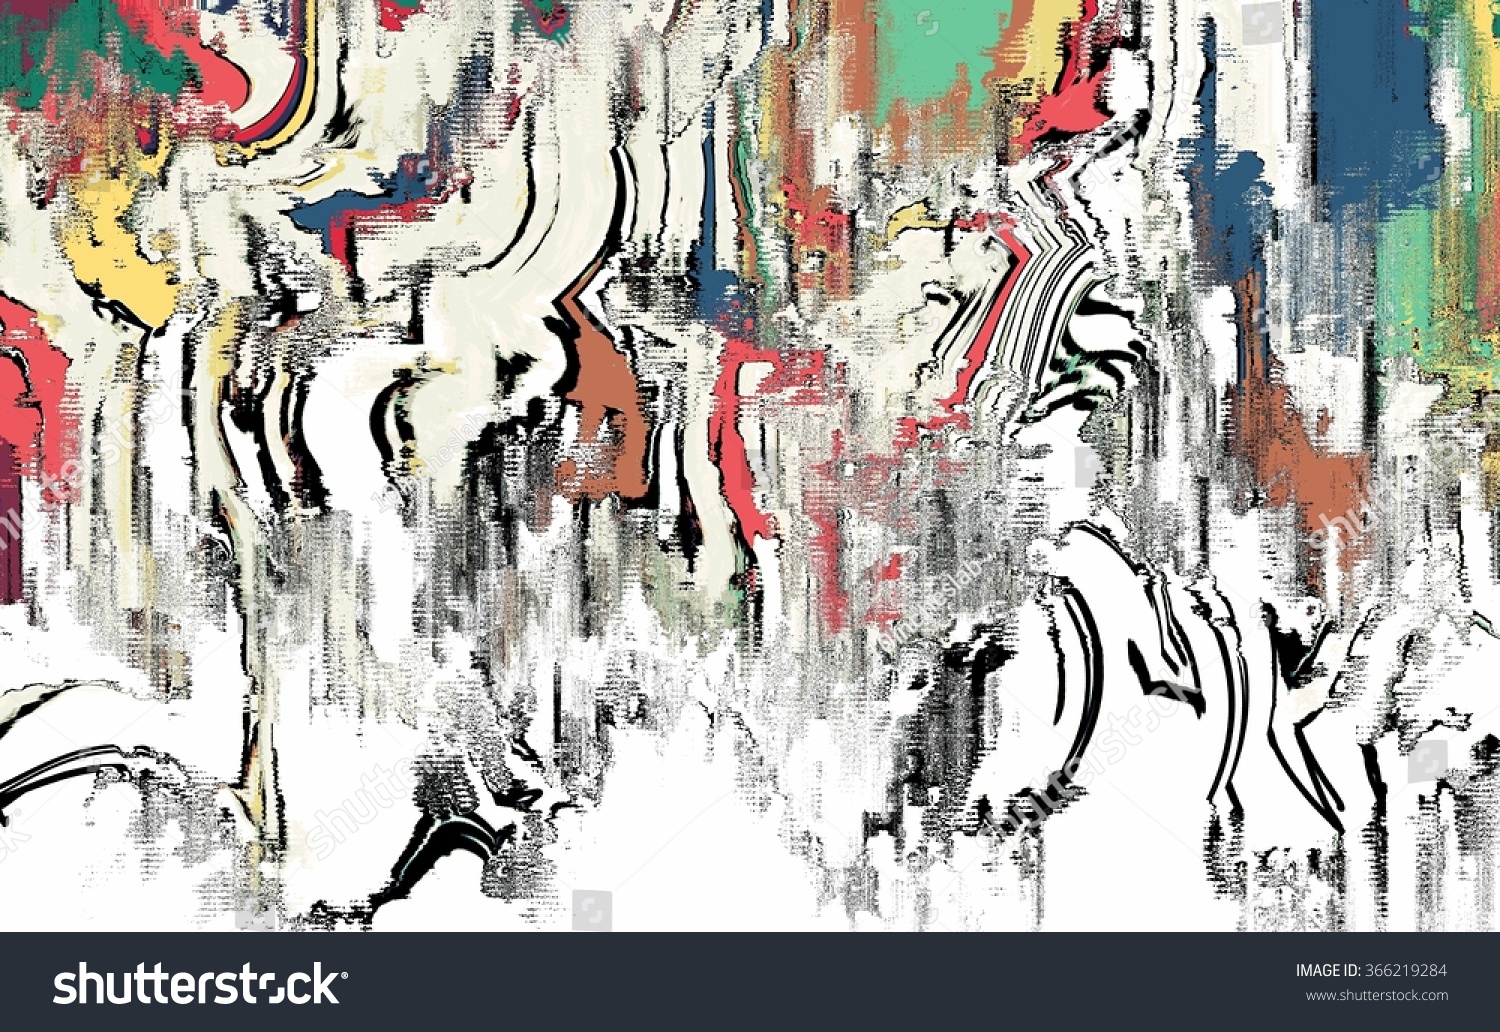 Abstract Digital Painting For Background/Canvas Painting Texture